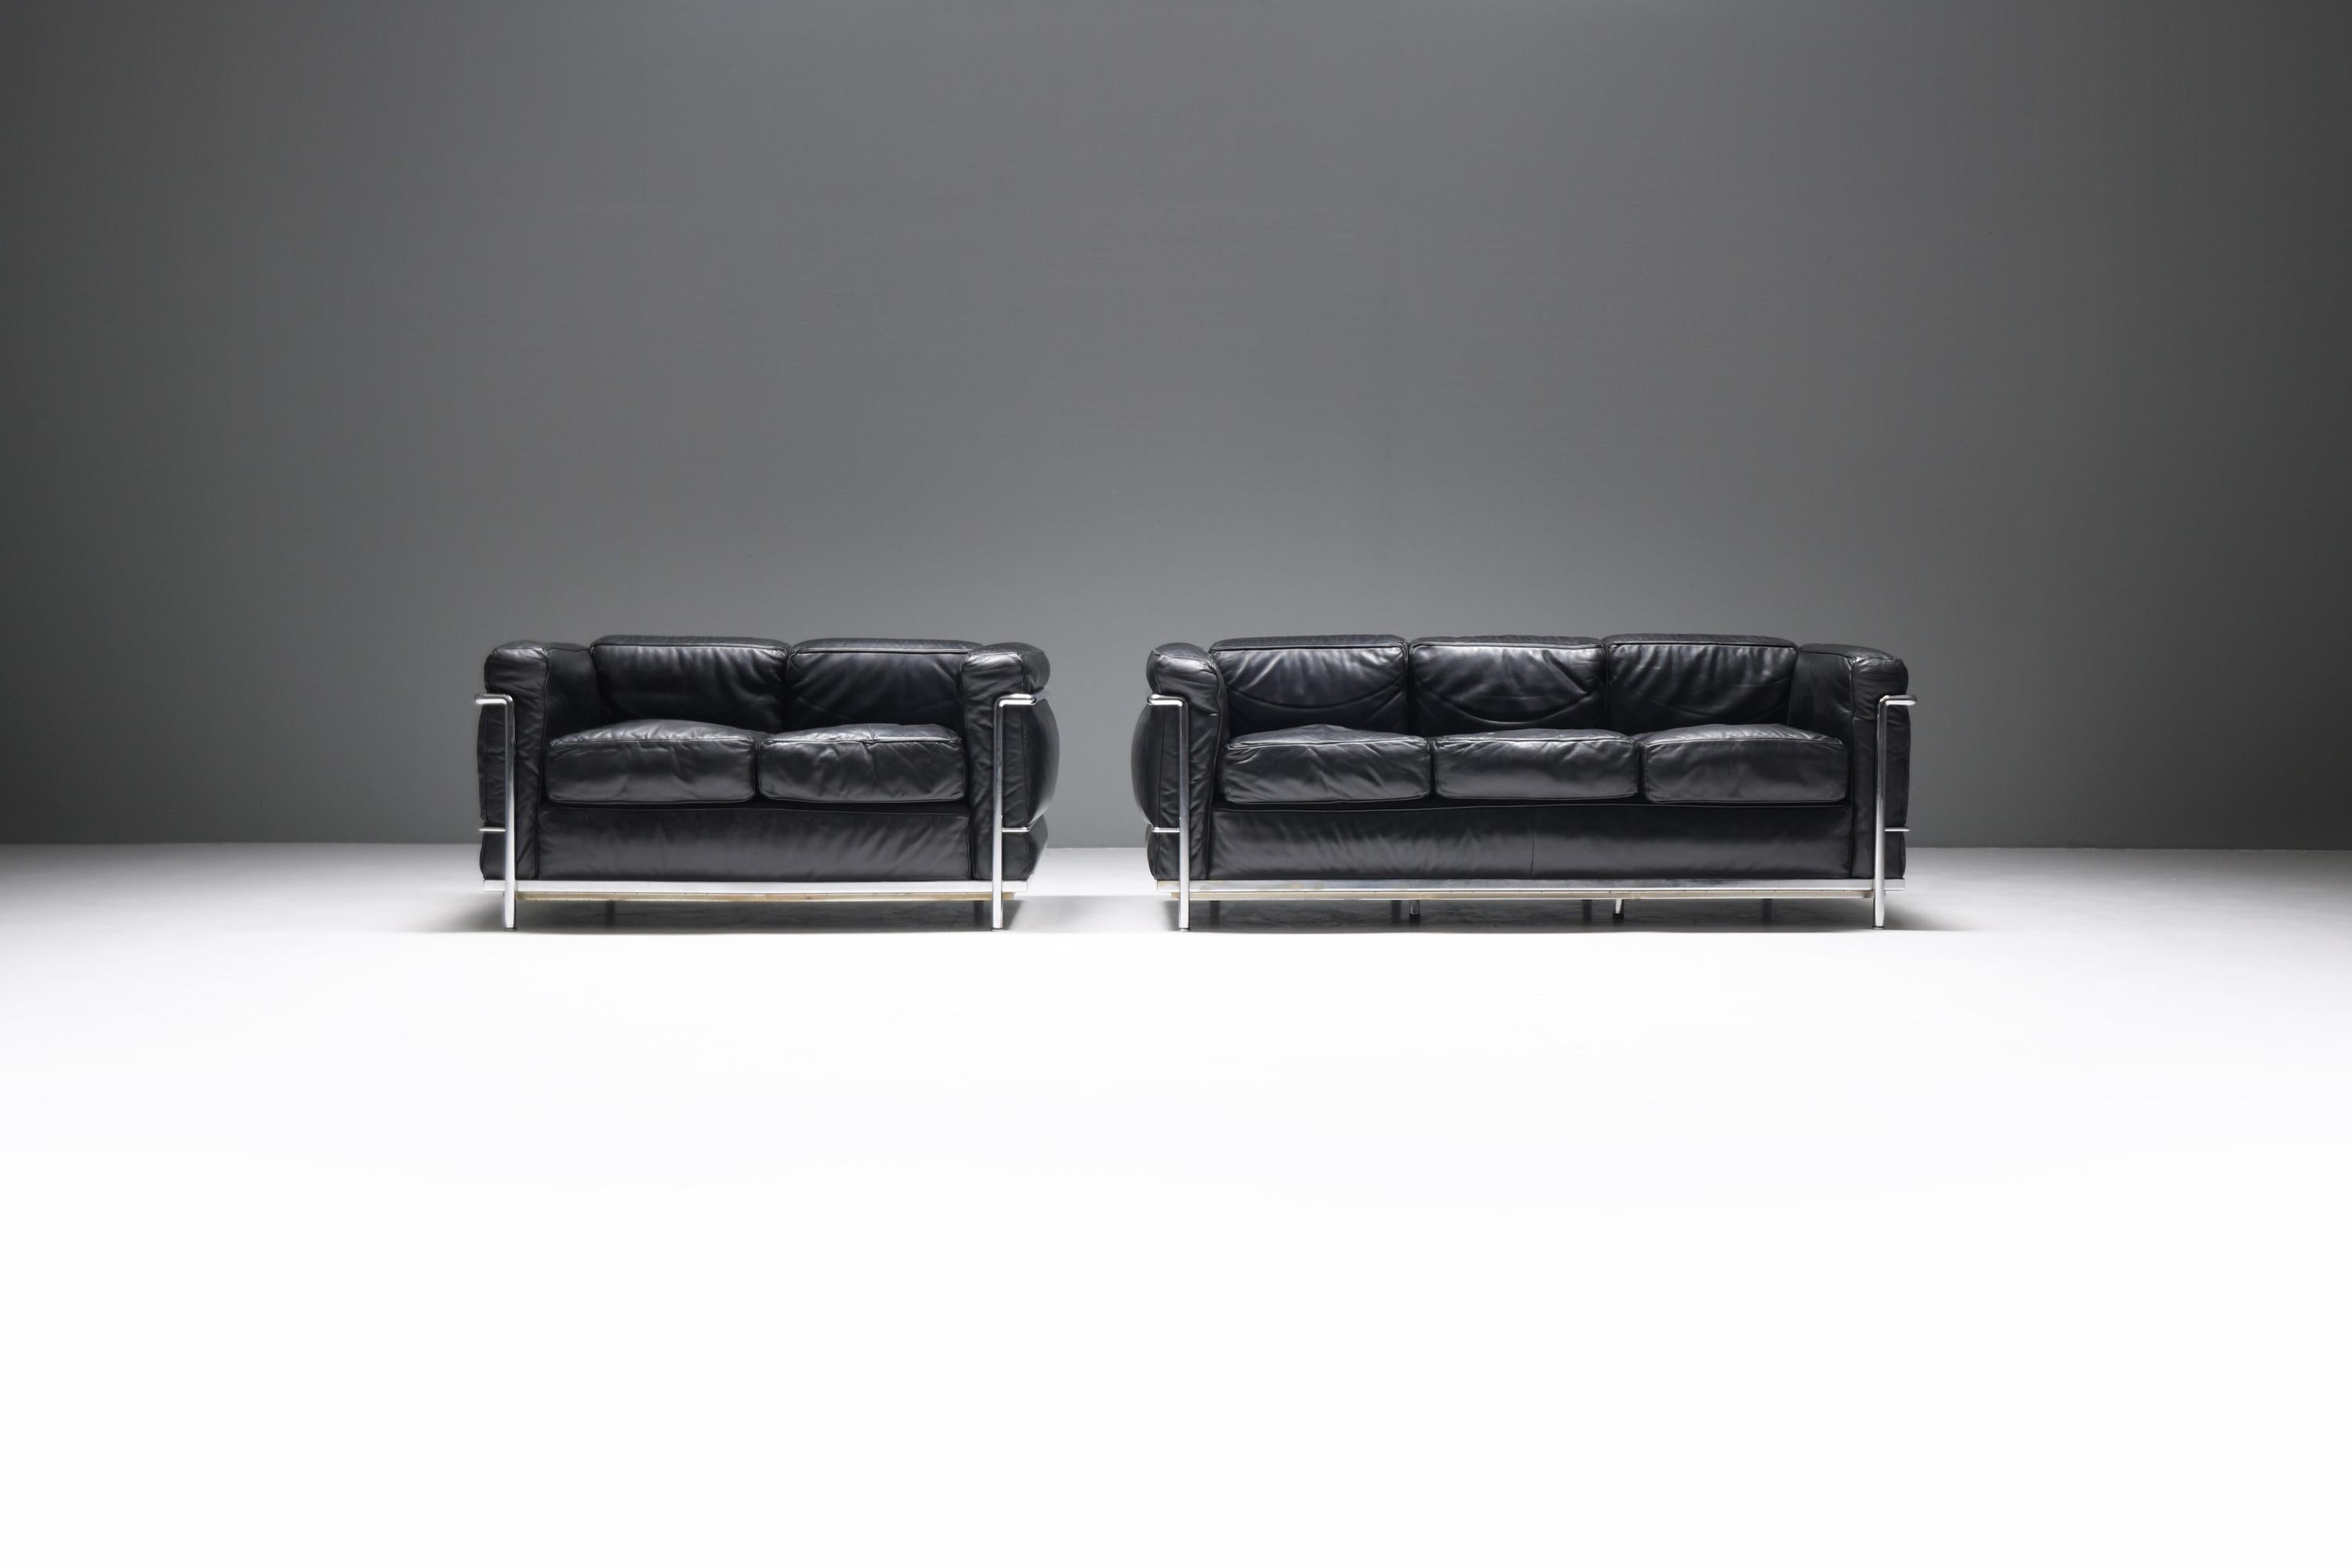 Exceptional LC-2 matching set in its original black leather. First owner (1979) with original invoices & delivery papers.
Low numbers : 003528 & 003559
Designed by Le Corbusier, Pierre Jeanneret & Charlotte Perriand for Cassina.

ARCHETYPE OF